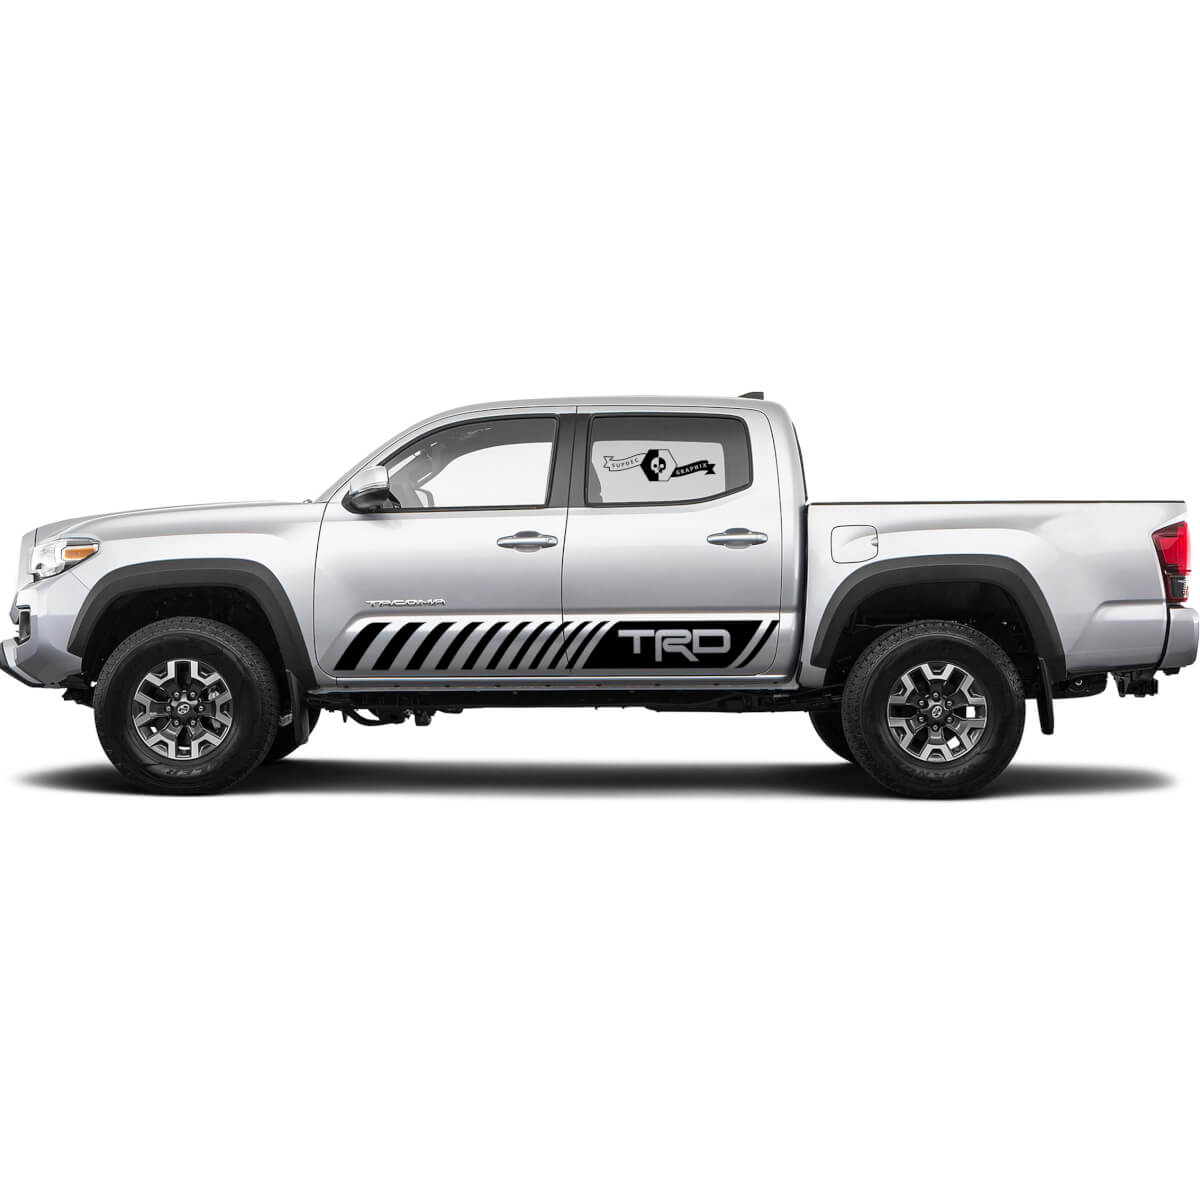 TRD off road leaves Rocker Panel BedSide Side Vinyl Stickers Decal fit to Toyota Tacoma Tundra all years 4